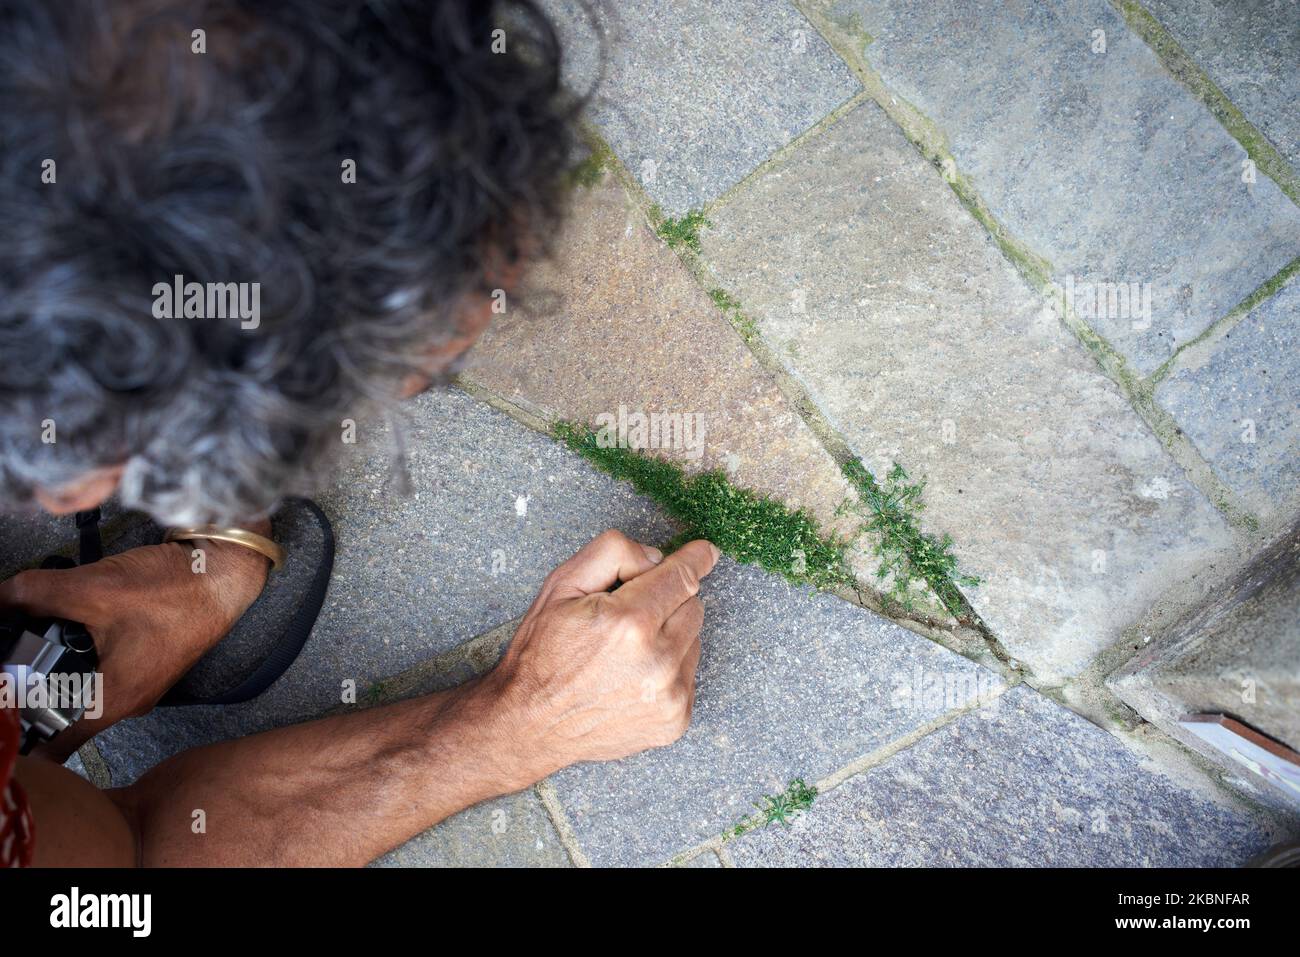 Boris Presseq, botanist, looks at a birdeye pearlwort growing in a street of Toulouse. Since the beginning of the lockdown due to the Covid-19 outbreak in France on March 16th, public parks and gardens, playgrounds are forbidden to the public. For more than six weeks, nobody has intervened in these public spaces. And the cleaning services haven't cut the wandering vegetation which grows in the streets or in the cracks of the city. As a result, nature reclaims public spaces. A botanist, Boris Presseq from the Natural History Museum of Toulouse, keeps an eye on this green explosion. Toulouse. Fr Stock Photo